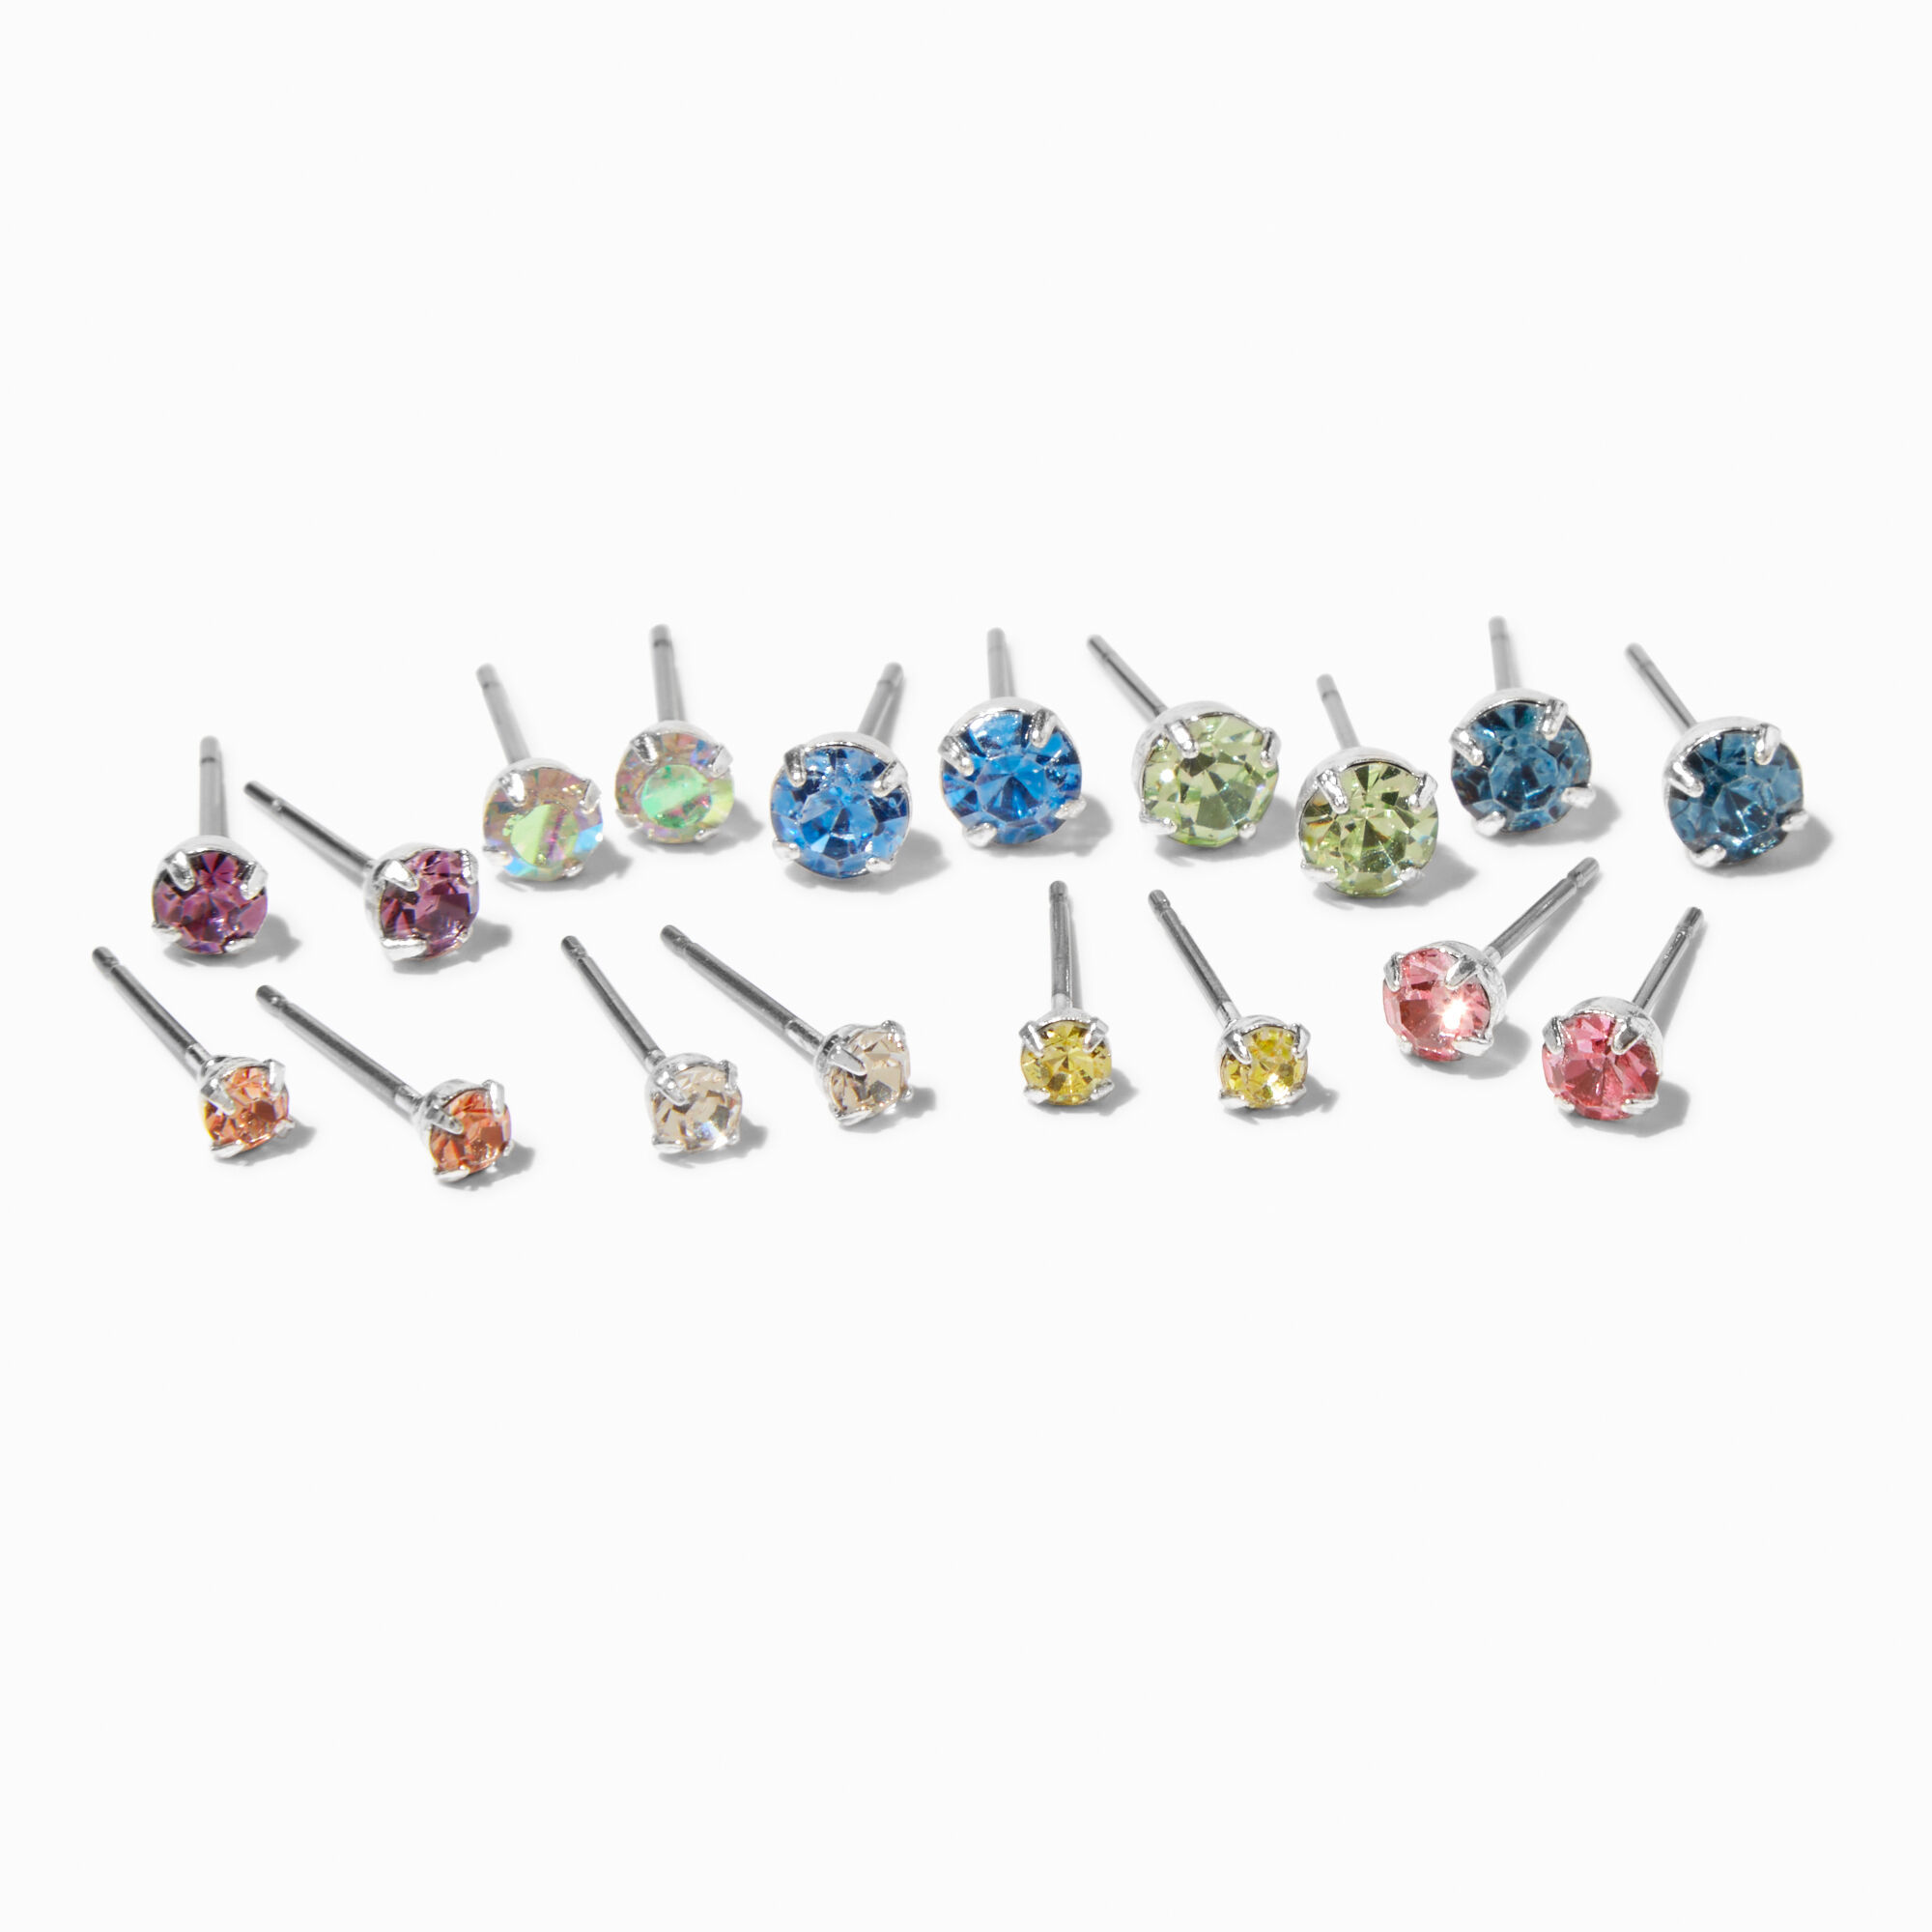 Only 230.00 usd for Rainbow Crystal Mini CC Logo Stud Earrings Online at  the Shop